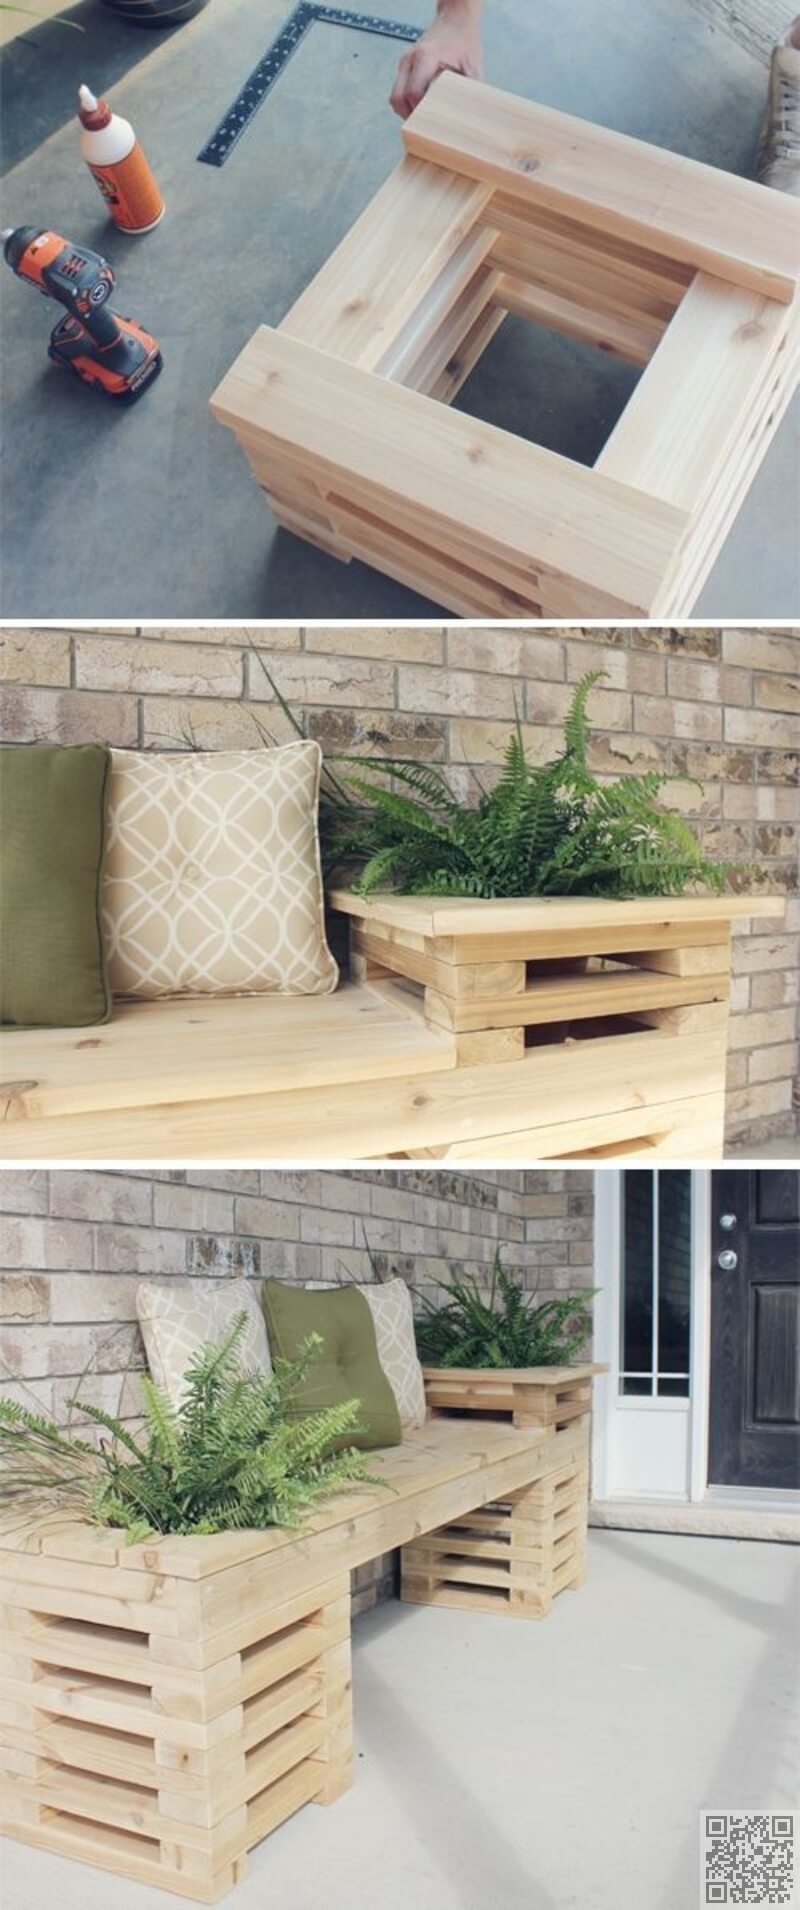 DIY Wood Bench with Planters